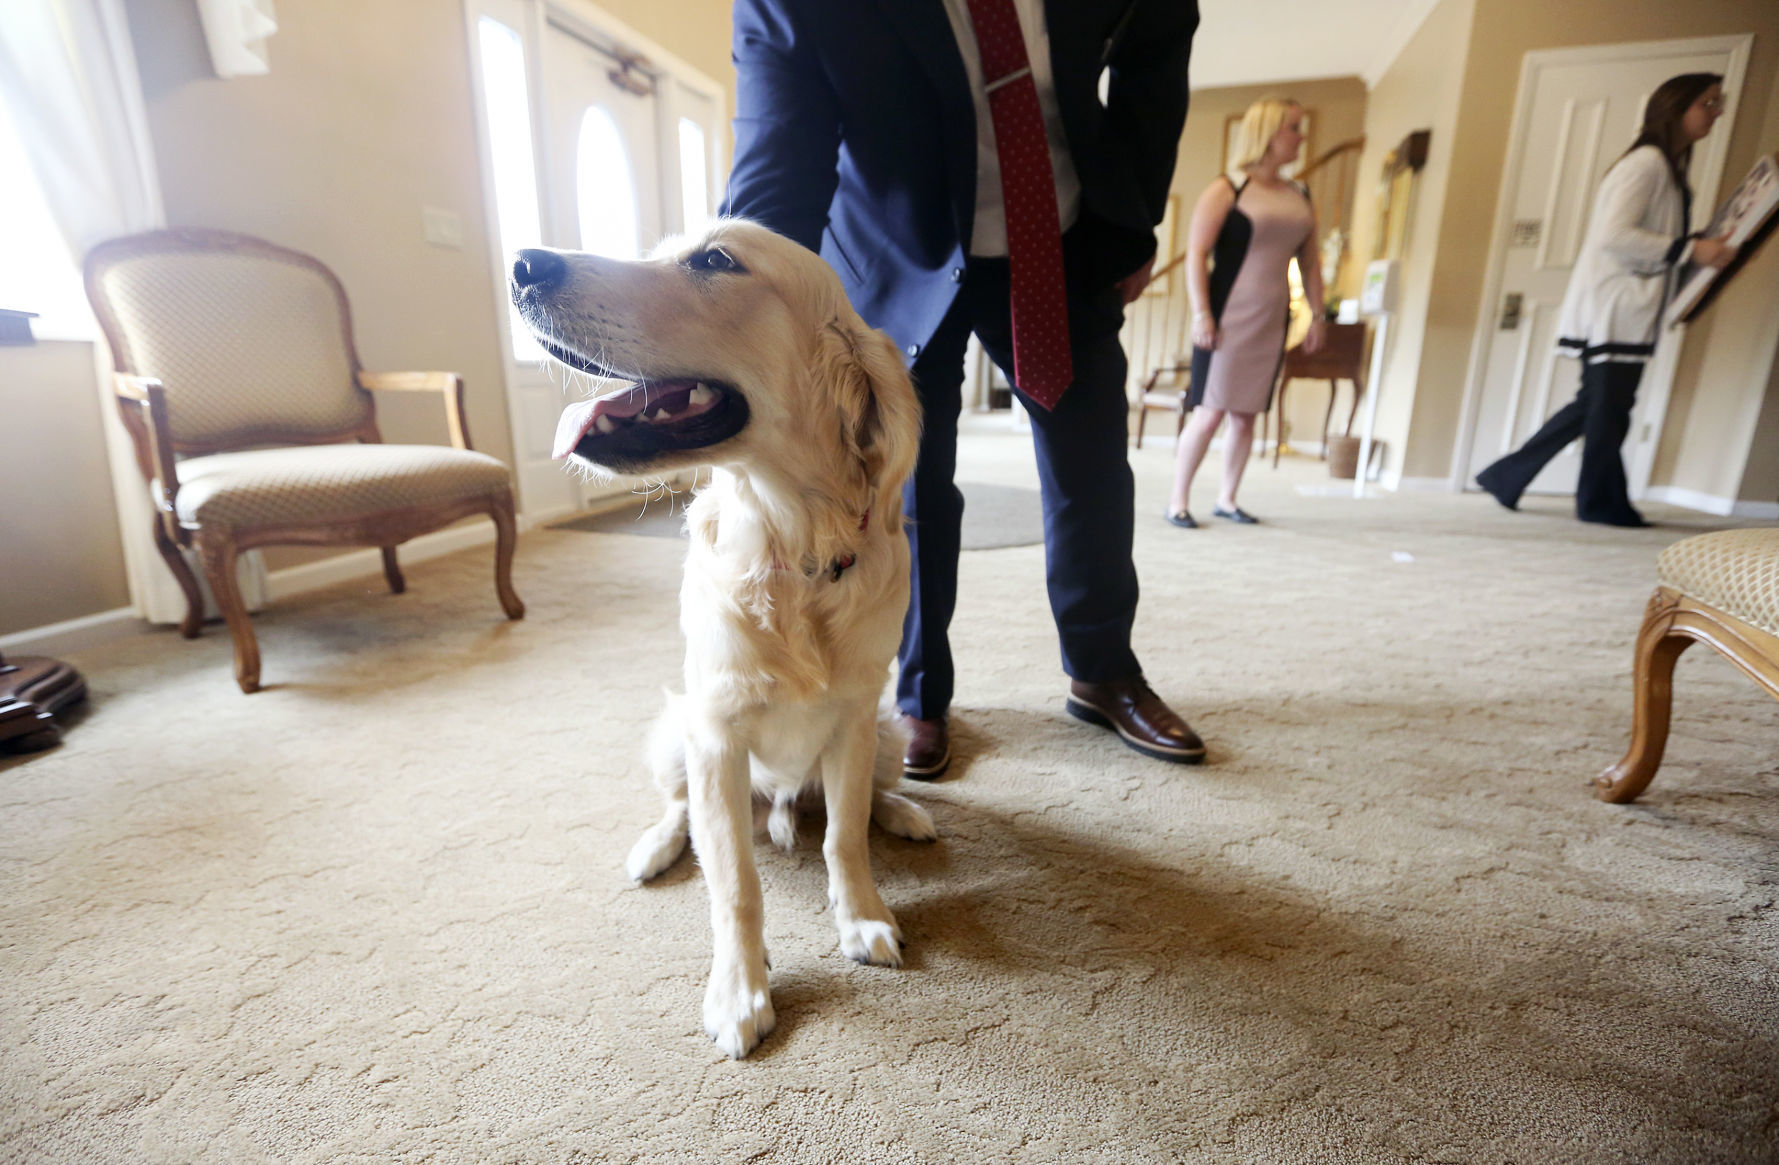 Stanley, an English golden retriever, comes to Hoffmann Schneider & Kitchen Funeral Home and Cremation Service in Dubuque to provide stress relief for employees and customers. Photo taken on Friday, June 19, 2020. PHOTO CREDIT: NICKI KOHL